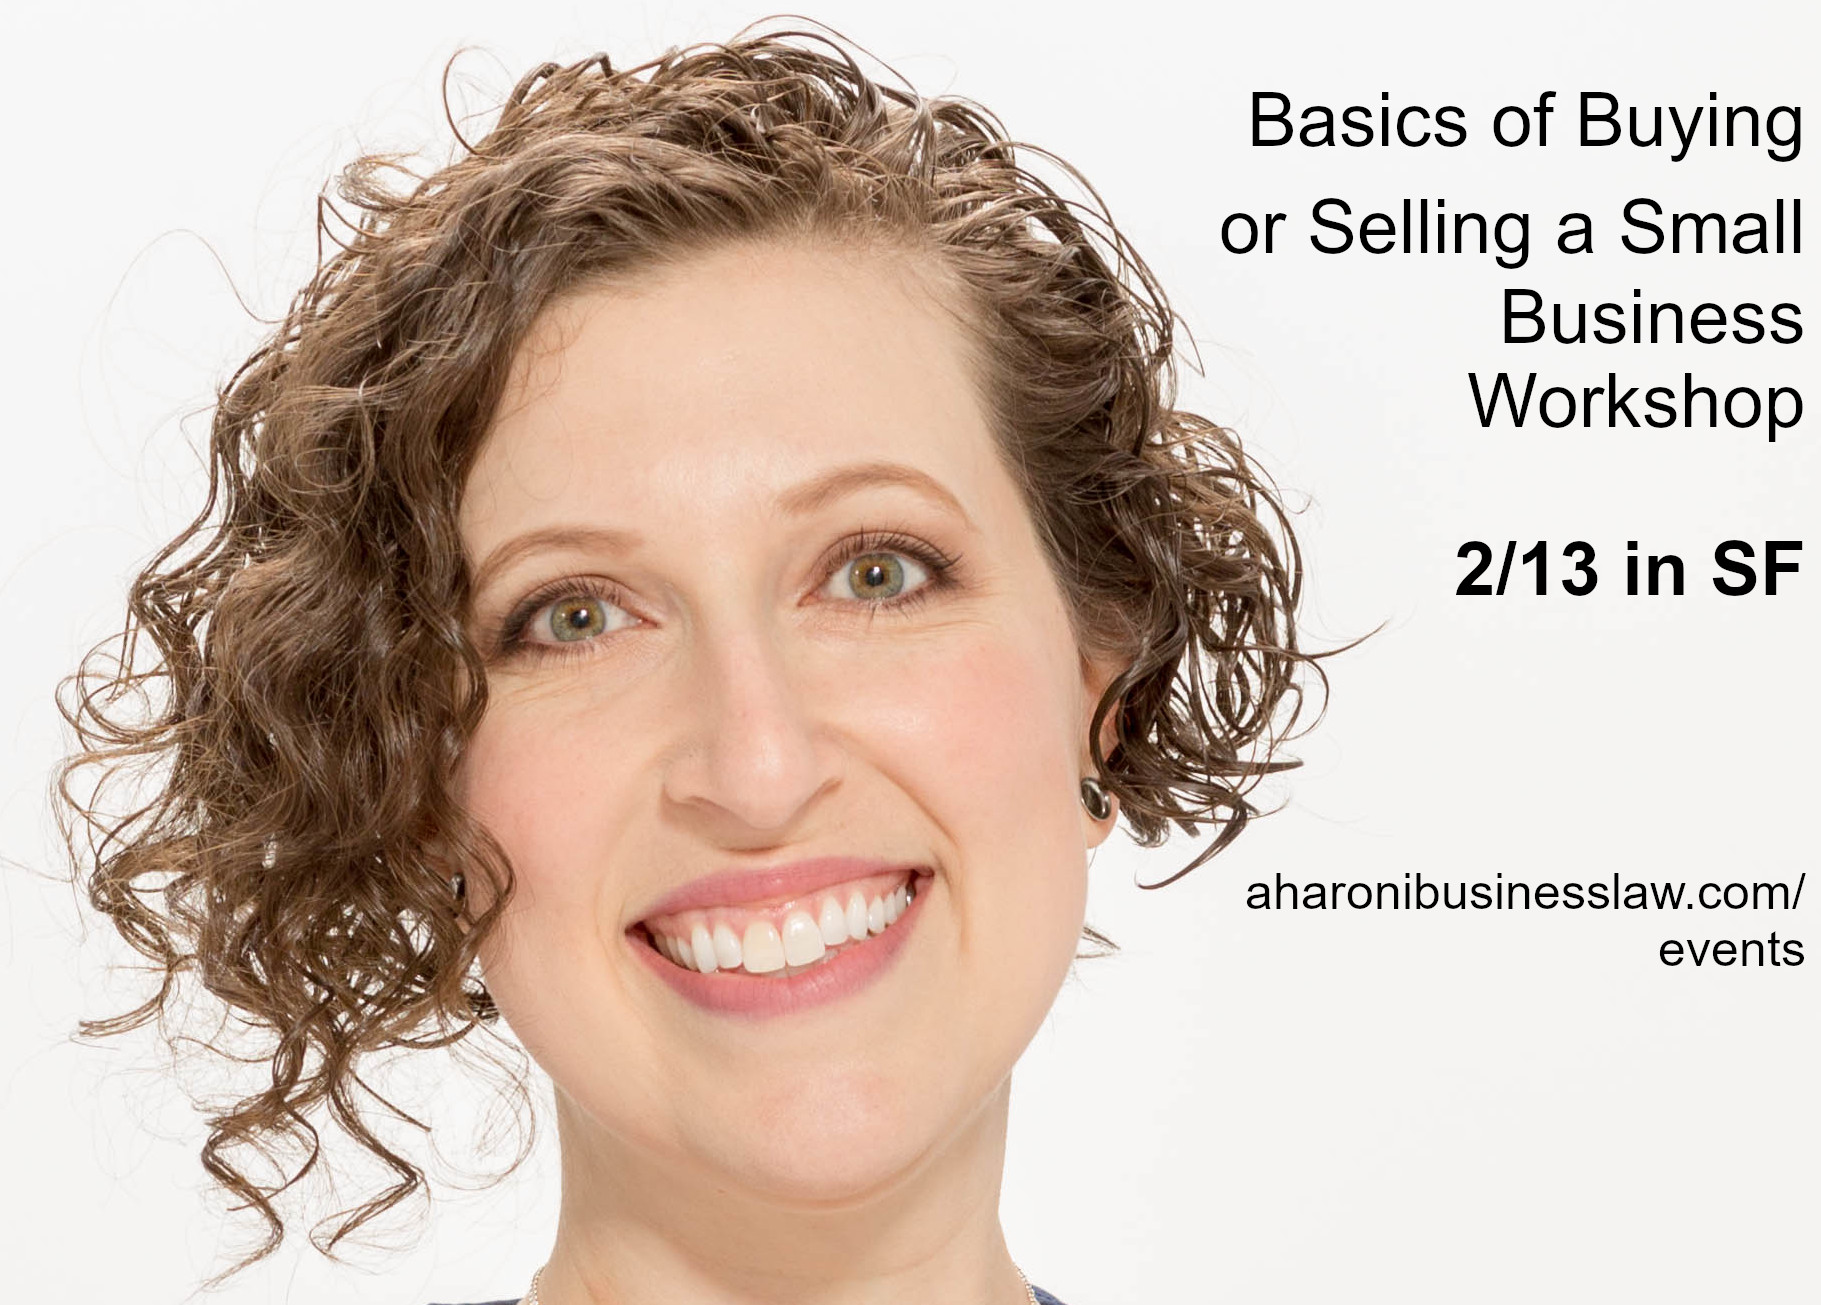 Galia Schmidt, smiling, with text "Basics of Buying or Selling a Small Business Workshop, 2/13 in SF"